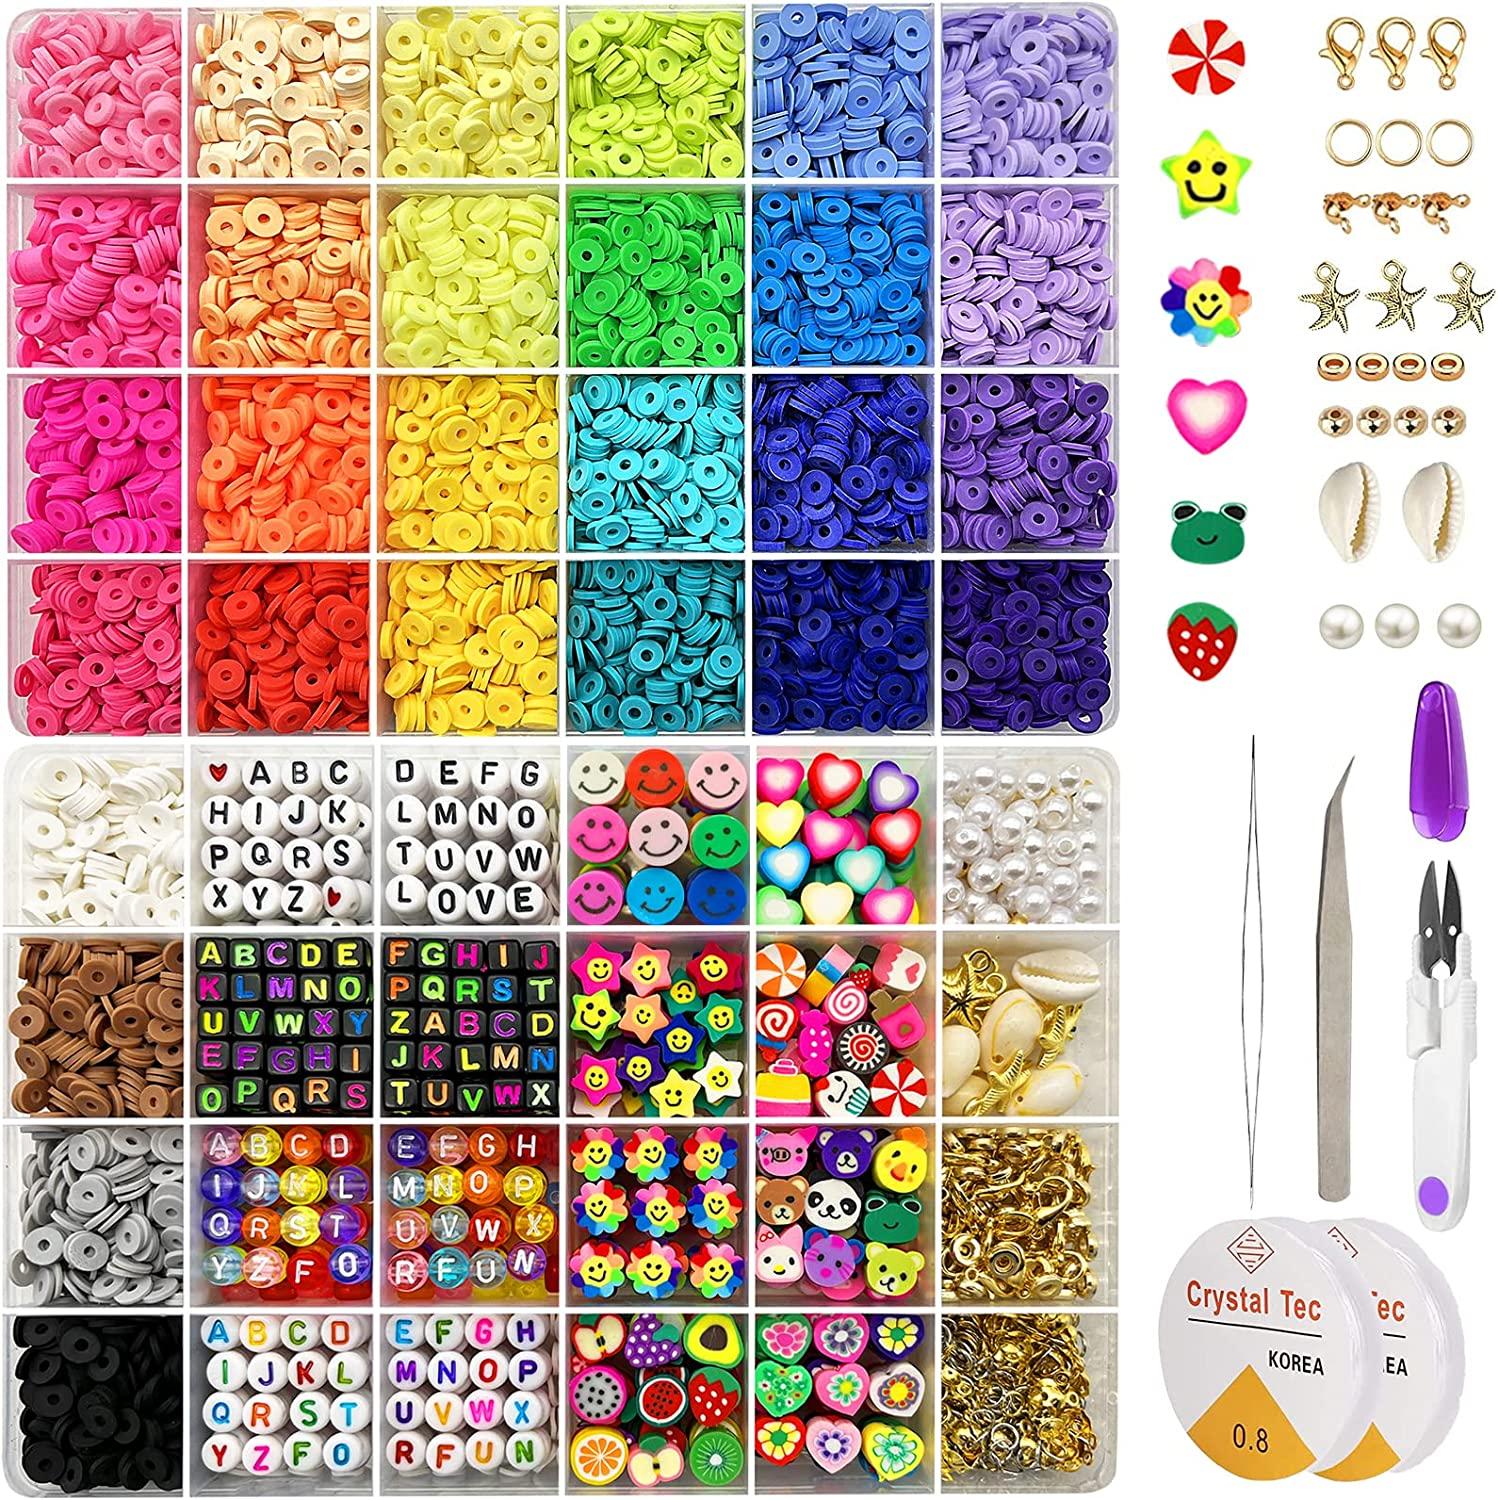 BeadsOEM Smiley Face For Jewelry Making 24 Colors 6mm Flat Polymer Heishi With Pendants Clay Bead Letter Bead Kit Diy 1600660460055